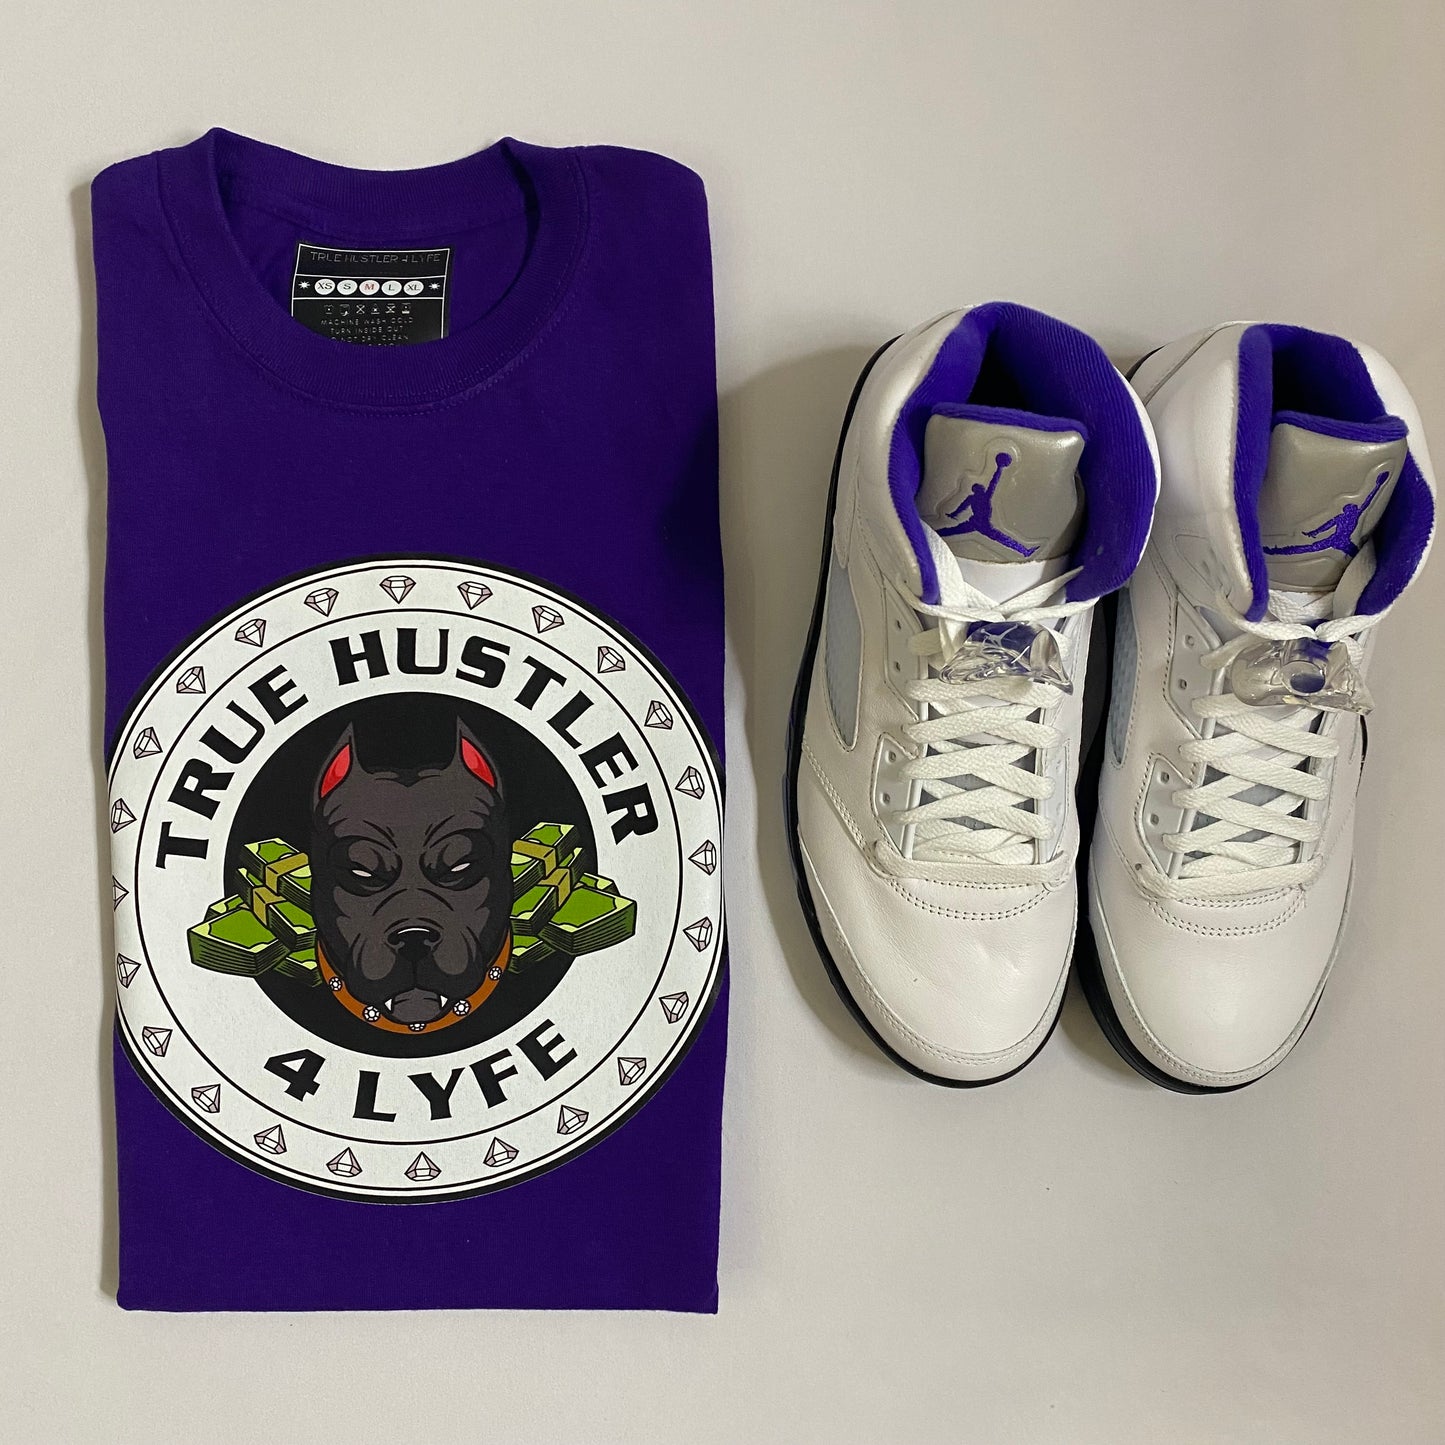 TH4L Grind Collection Unisex Graphic Tees - Purple Heavy Duty Cotton T-Shirt and White Grind Logo Tee